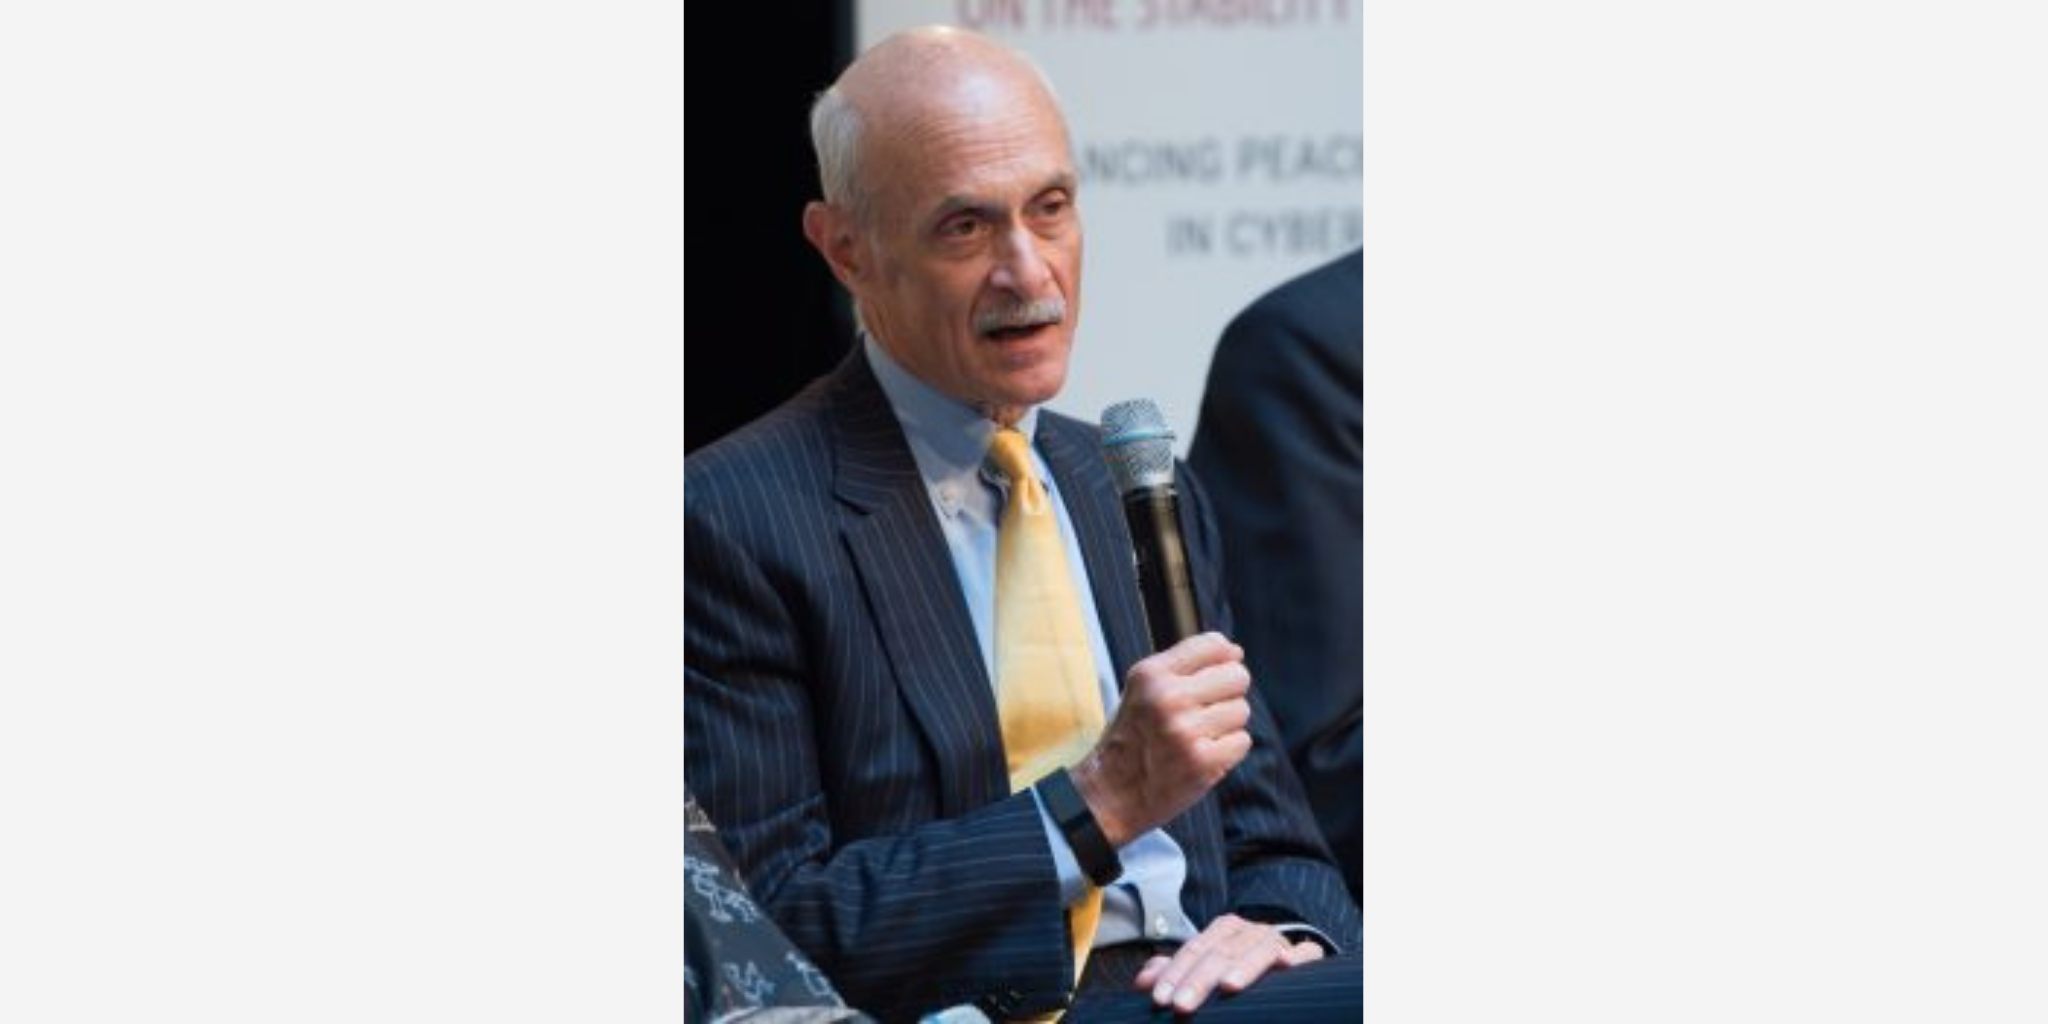 Michael Chertoff speaks with Deutsche Welle about the need for global rules for cyberspace